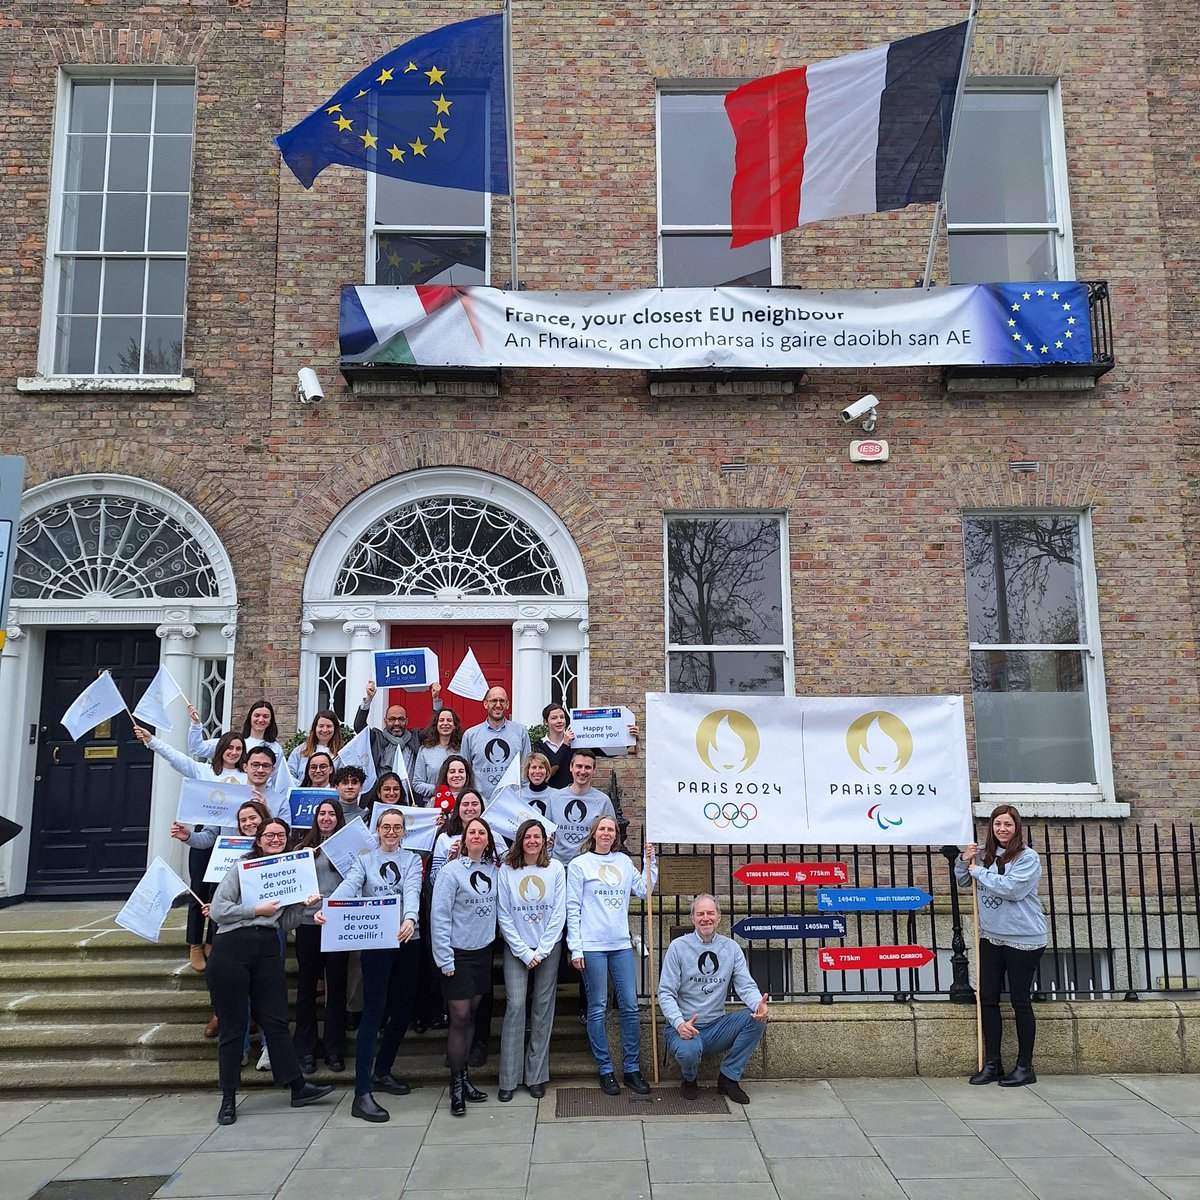 Only 100 days to go until @Paris2024 ! The Paris 2024 Olympic and Paralympic games are just around the corner 🏅🙌 #TeamFrance looks forward to welcoming you 🇫🇷 📷 Team @FranceInIreland on Merrion Square #EquipedesFrançais #Paris2024 @francediplo